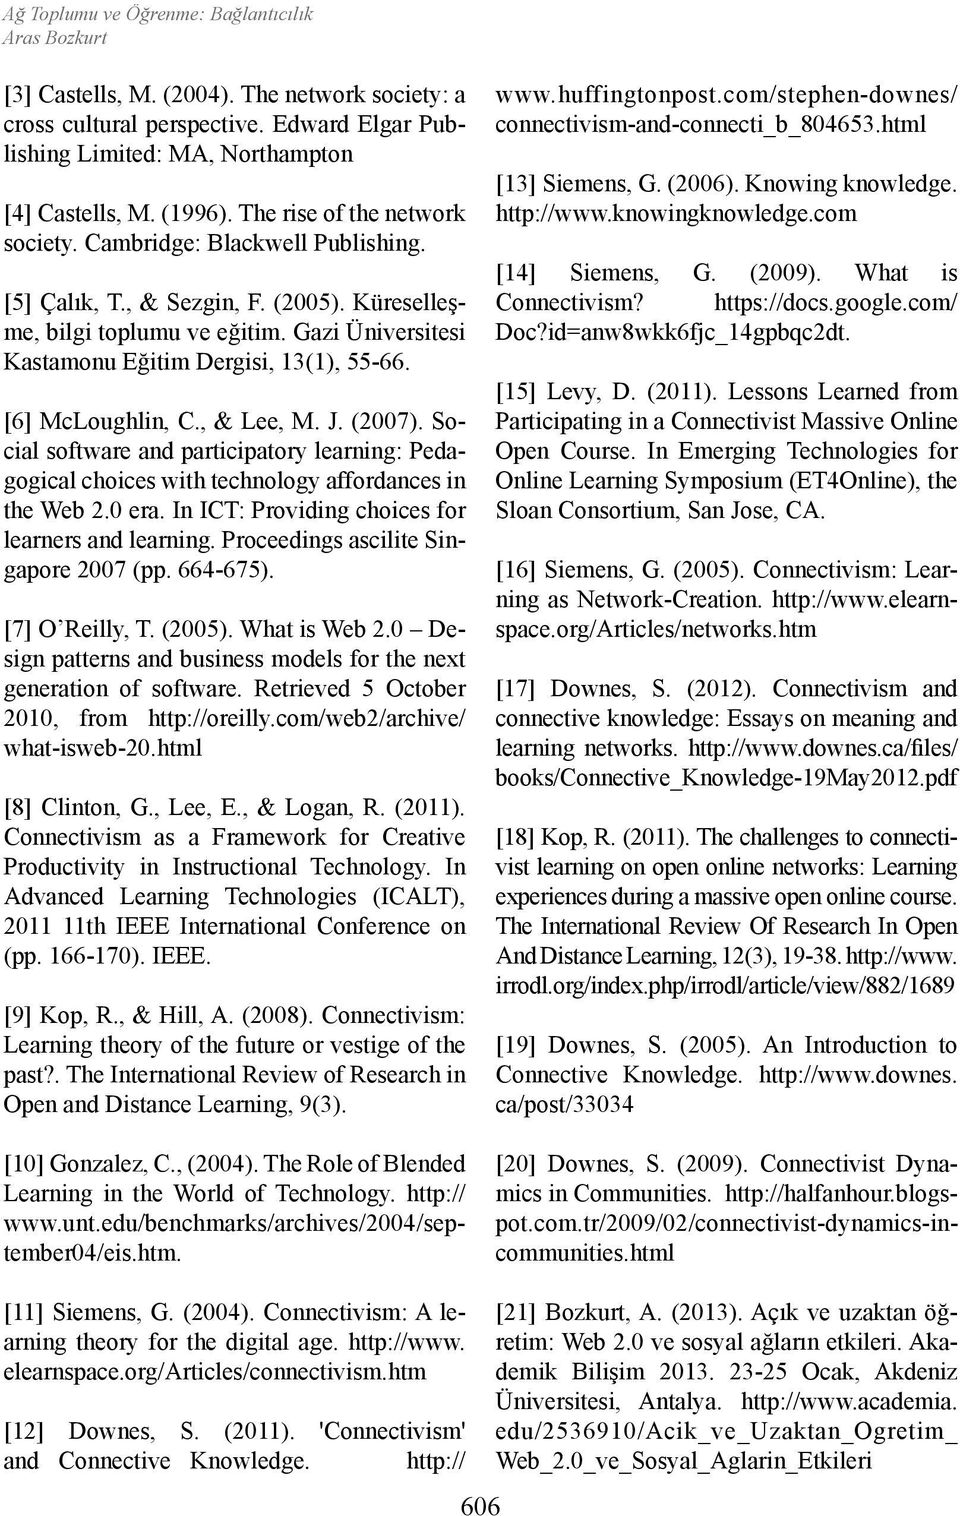 [6] McLoughlin, C., & Lee, M. J. (2007). Social software and participatory learning: Pedagogical choices with technology affordances in the Web 2.0 era.